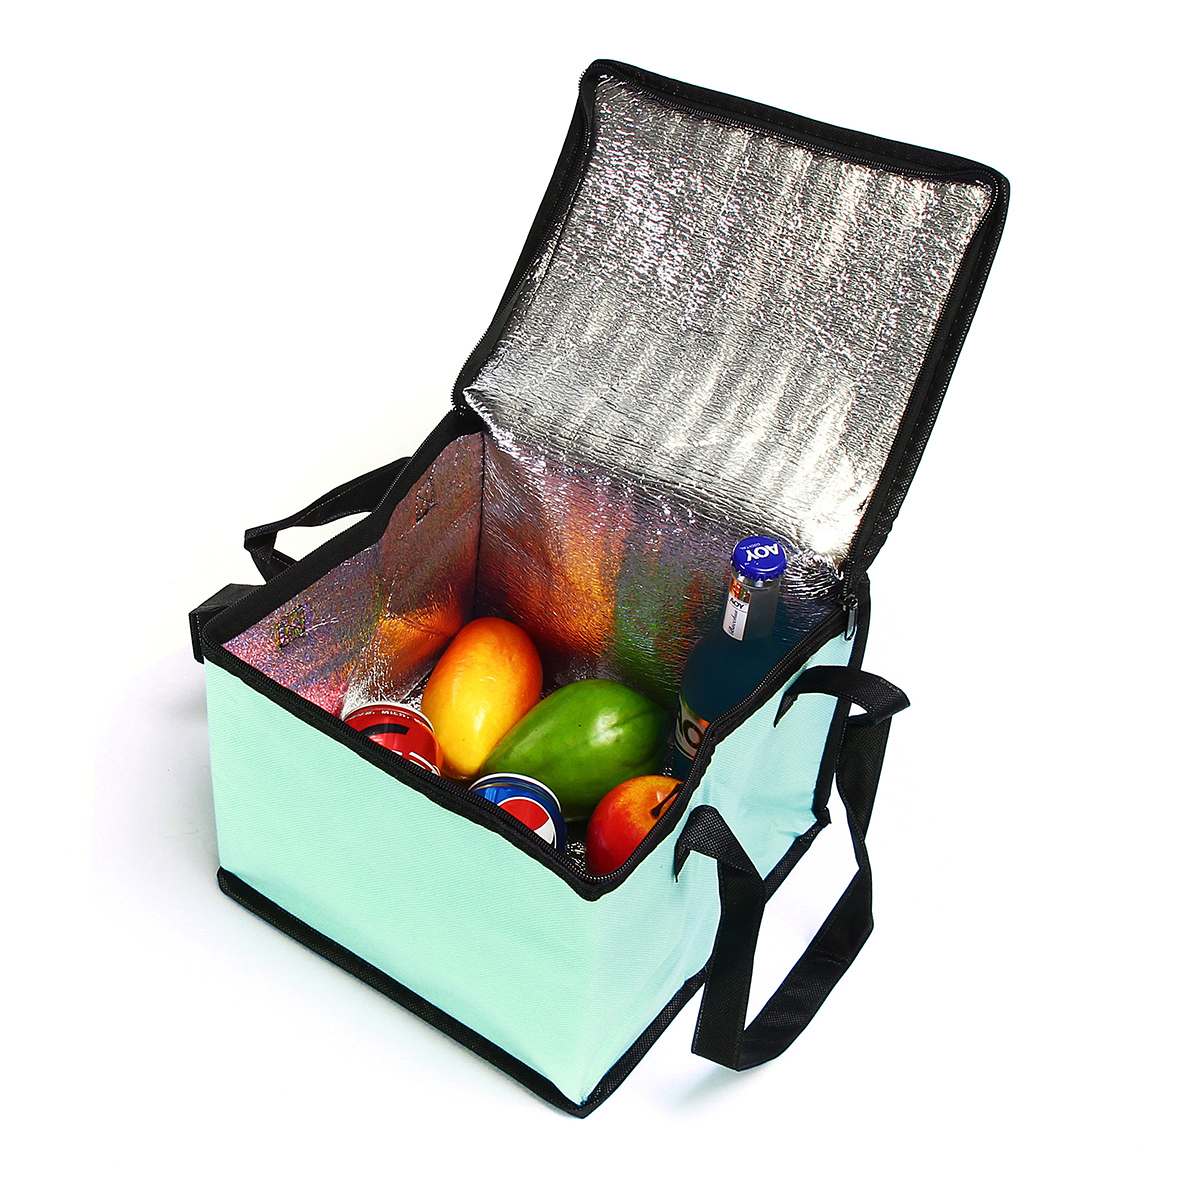 8-Inch-Non-woven-Fresh-keeping-Tote-Bag-with-Zipper-Cake-Picnic-Lunch-Bag-Reusable-Grocery-Bag-1353005-14